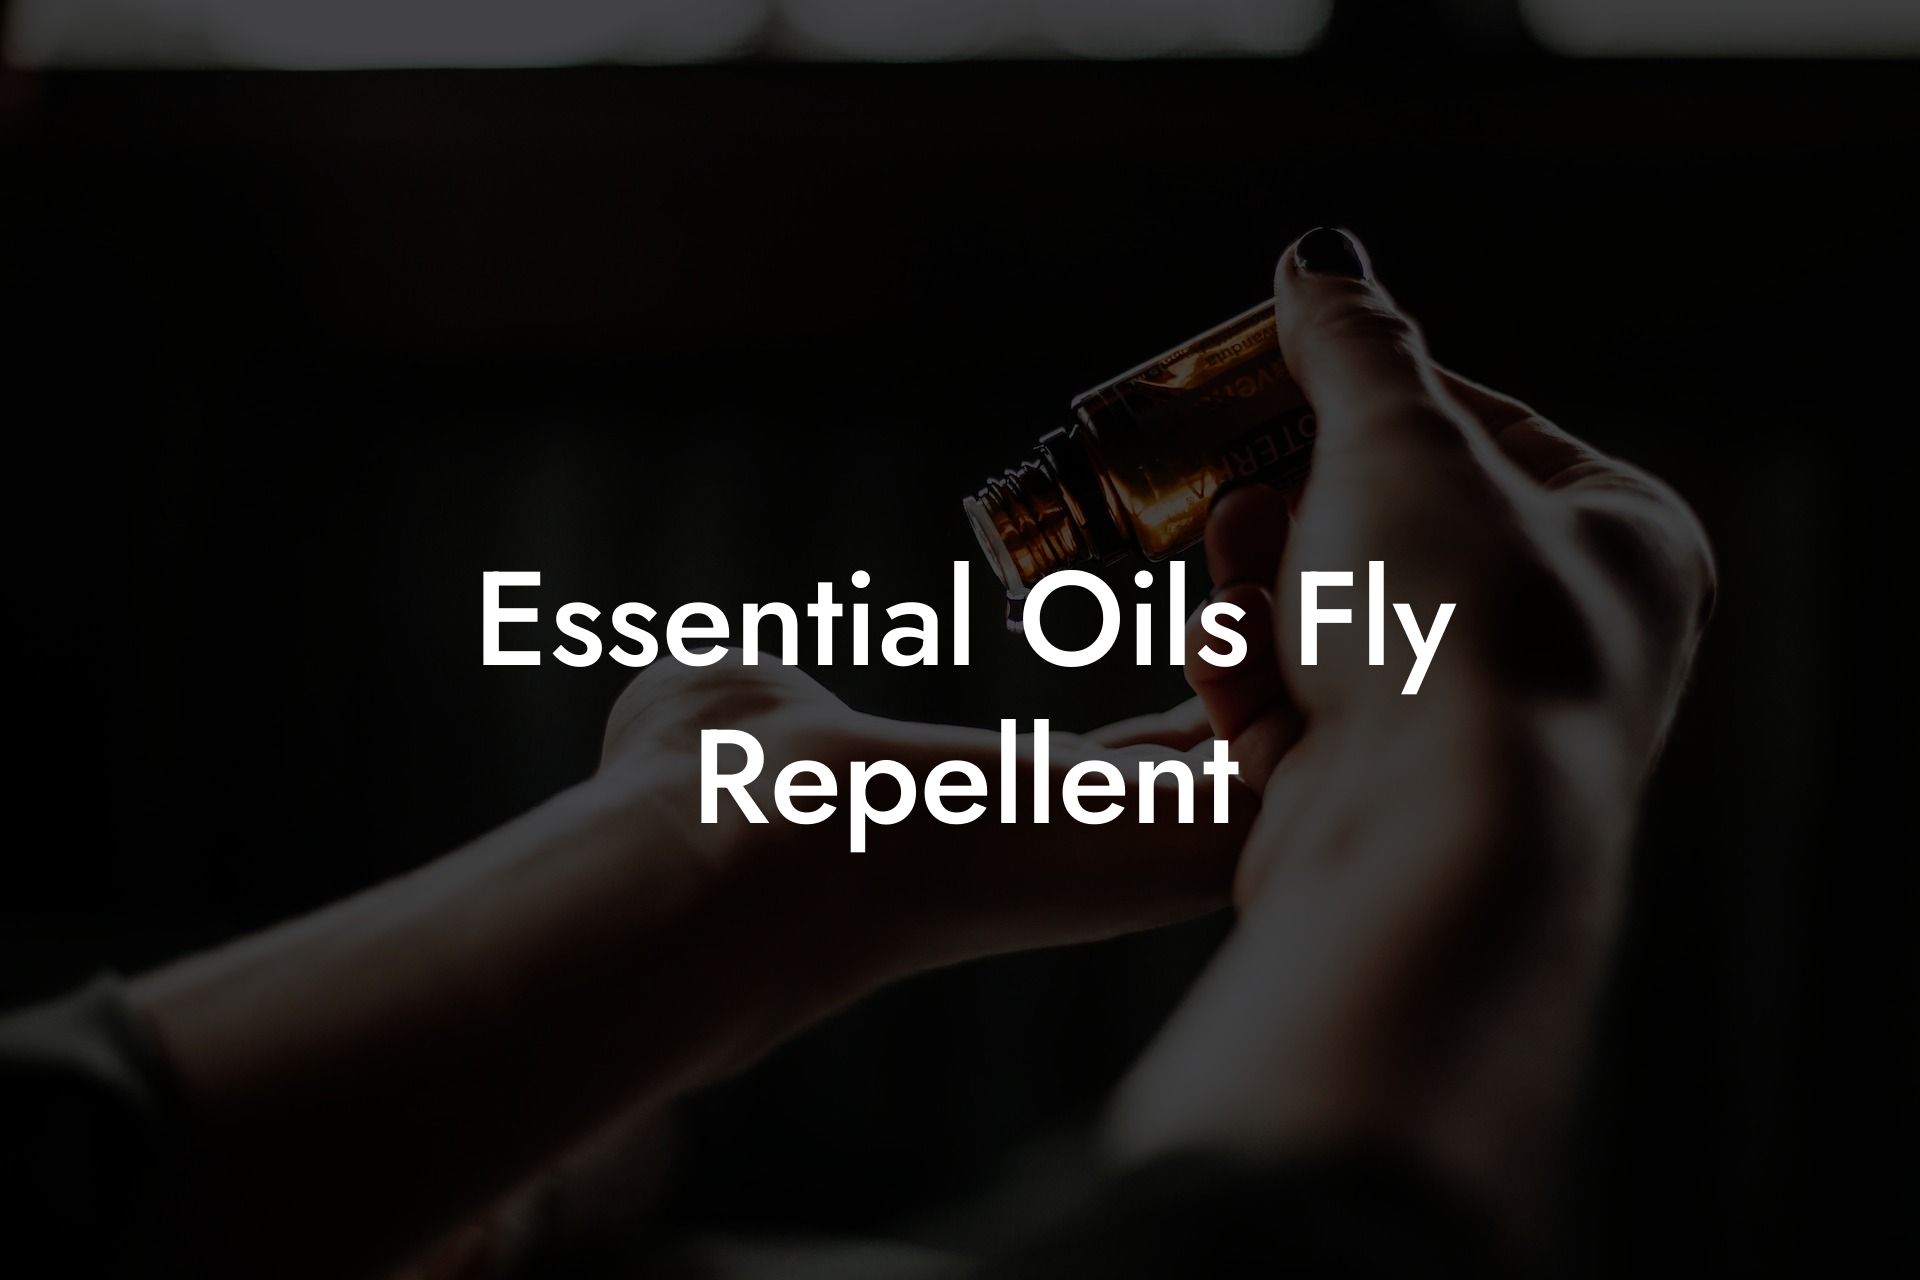 Essential Oils Fly Repellent